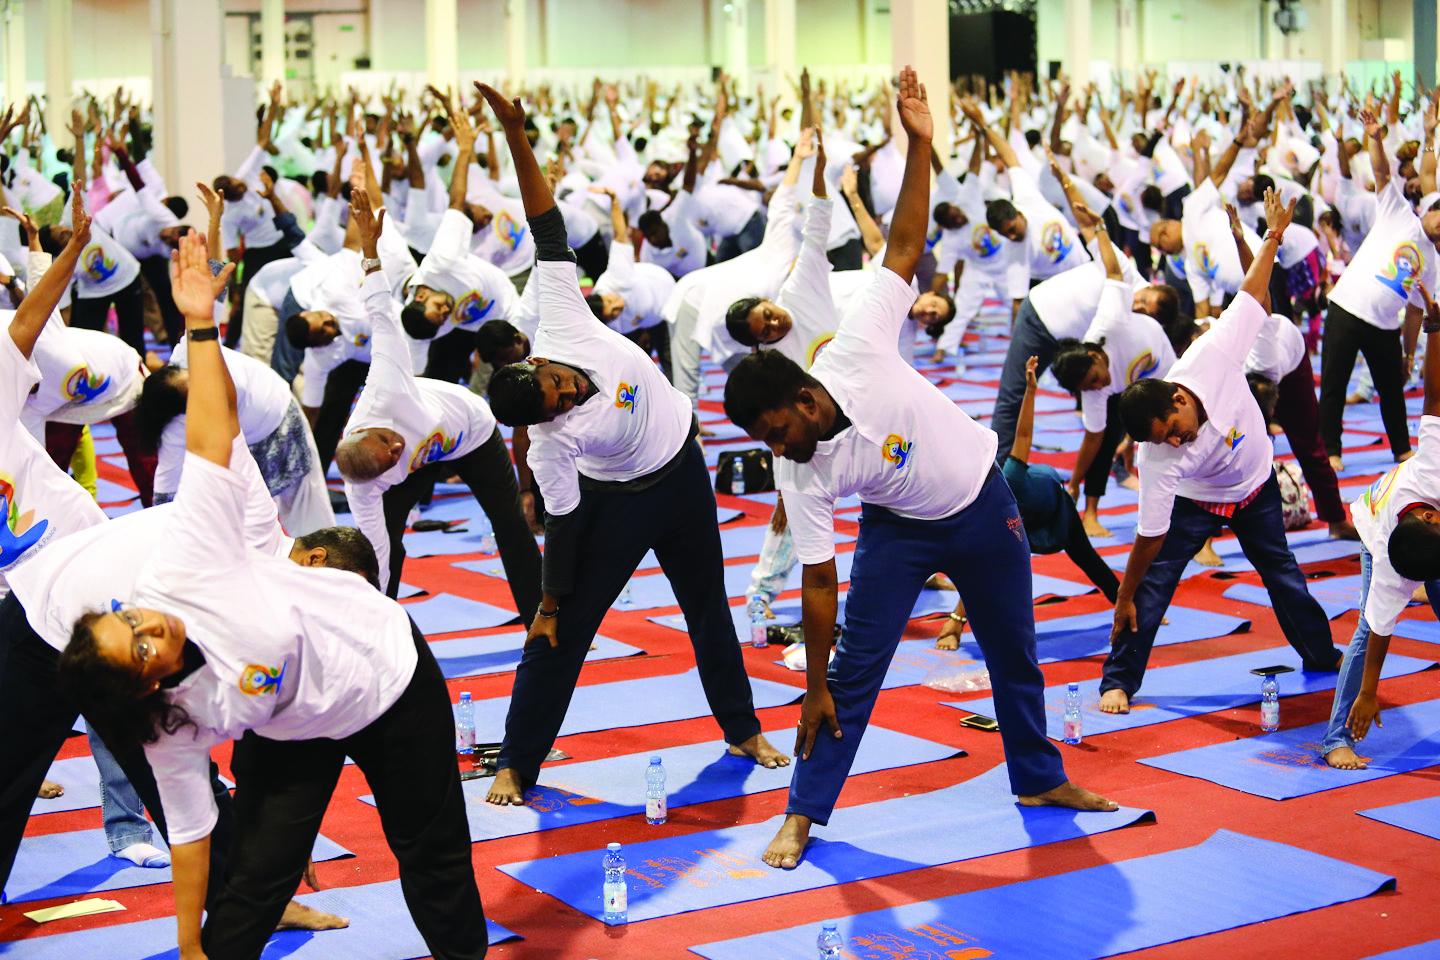 More than 5,000 take part in Indian Embassy's mega yoga event in Muscat